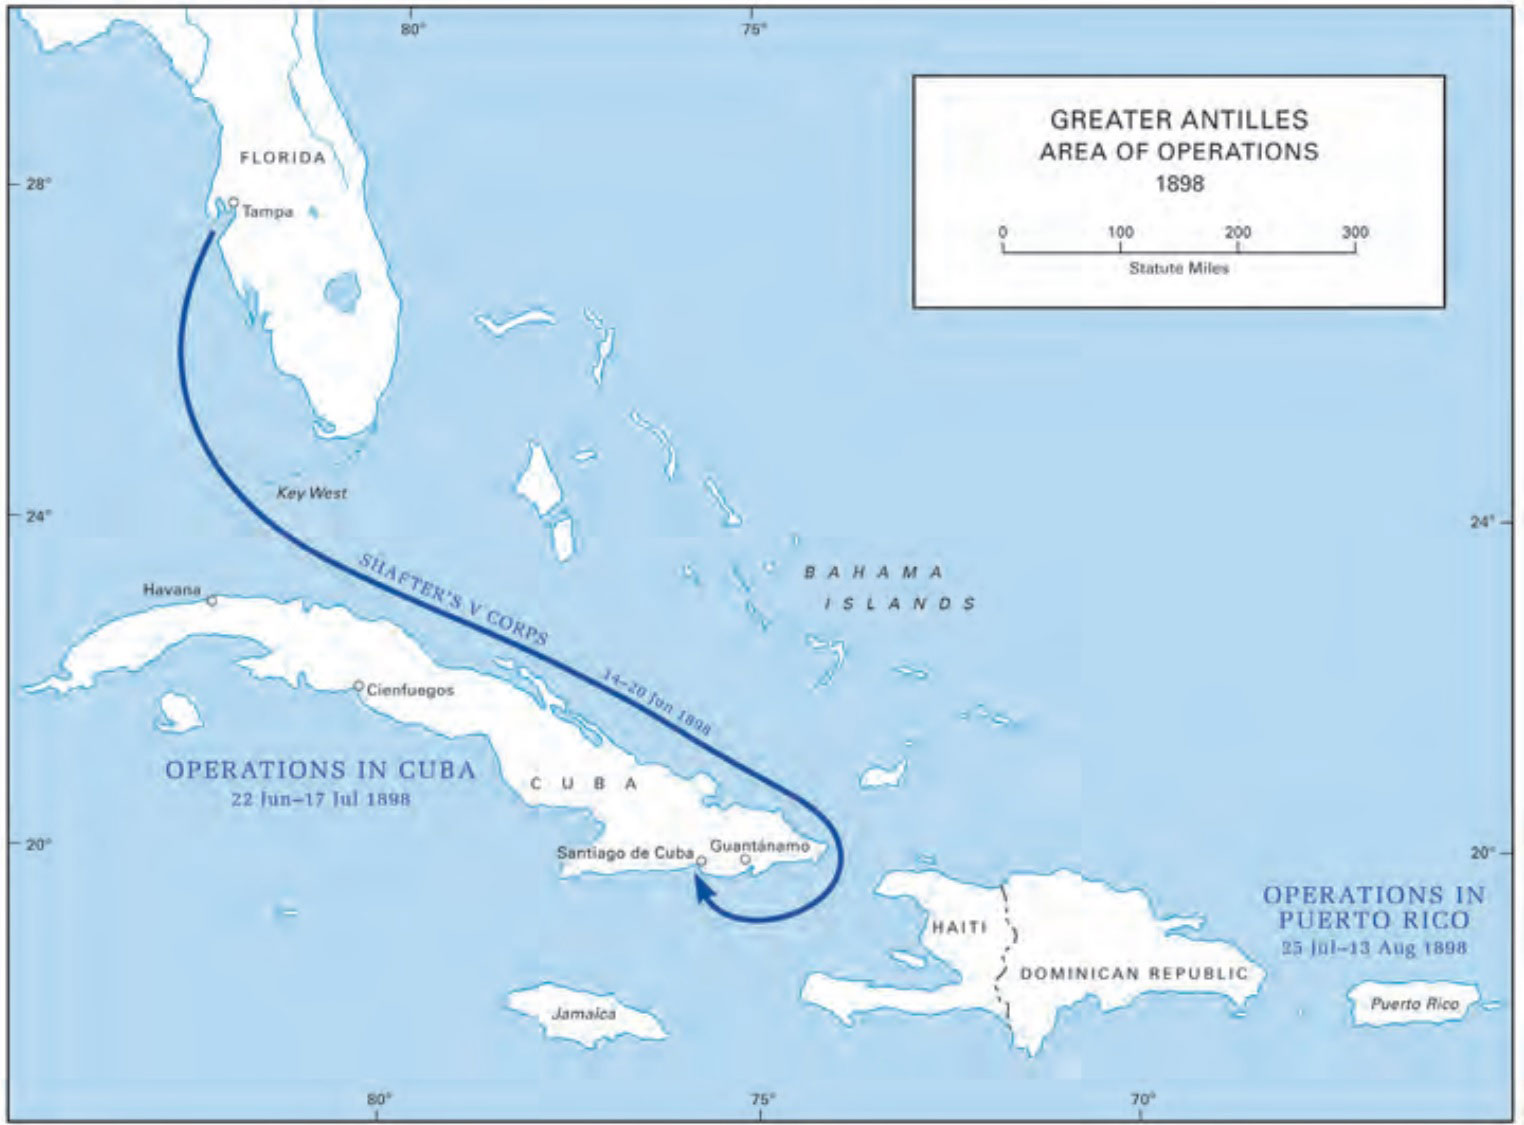 A map of the Greater Antilles Area of Operations 1898. 